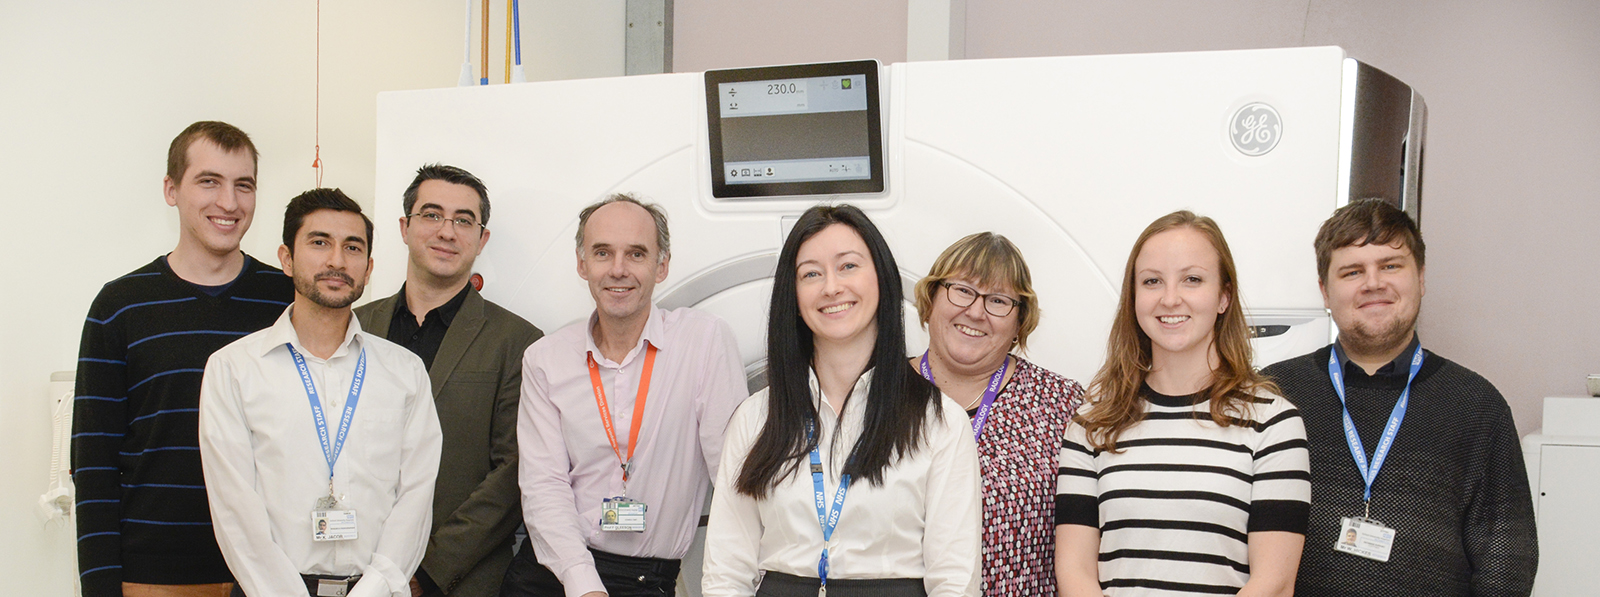 Eight smiling people with lanyards in front of an MRI scanner